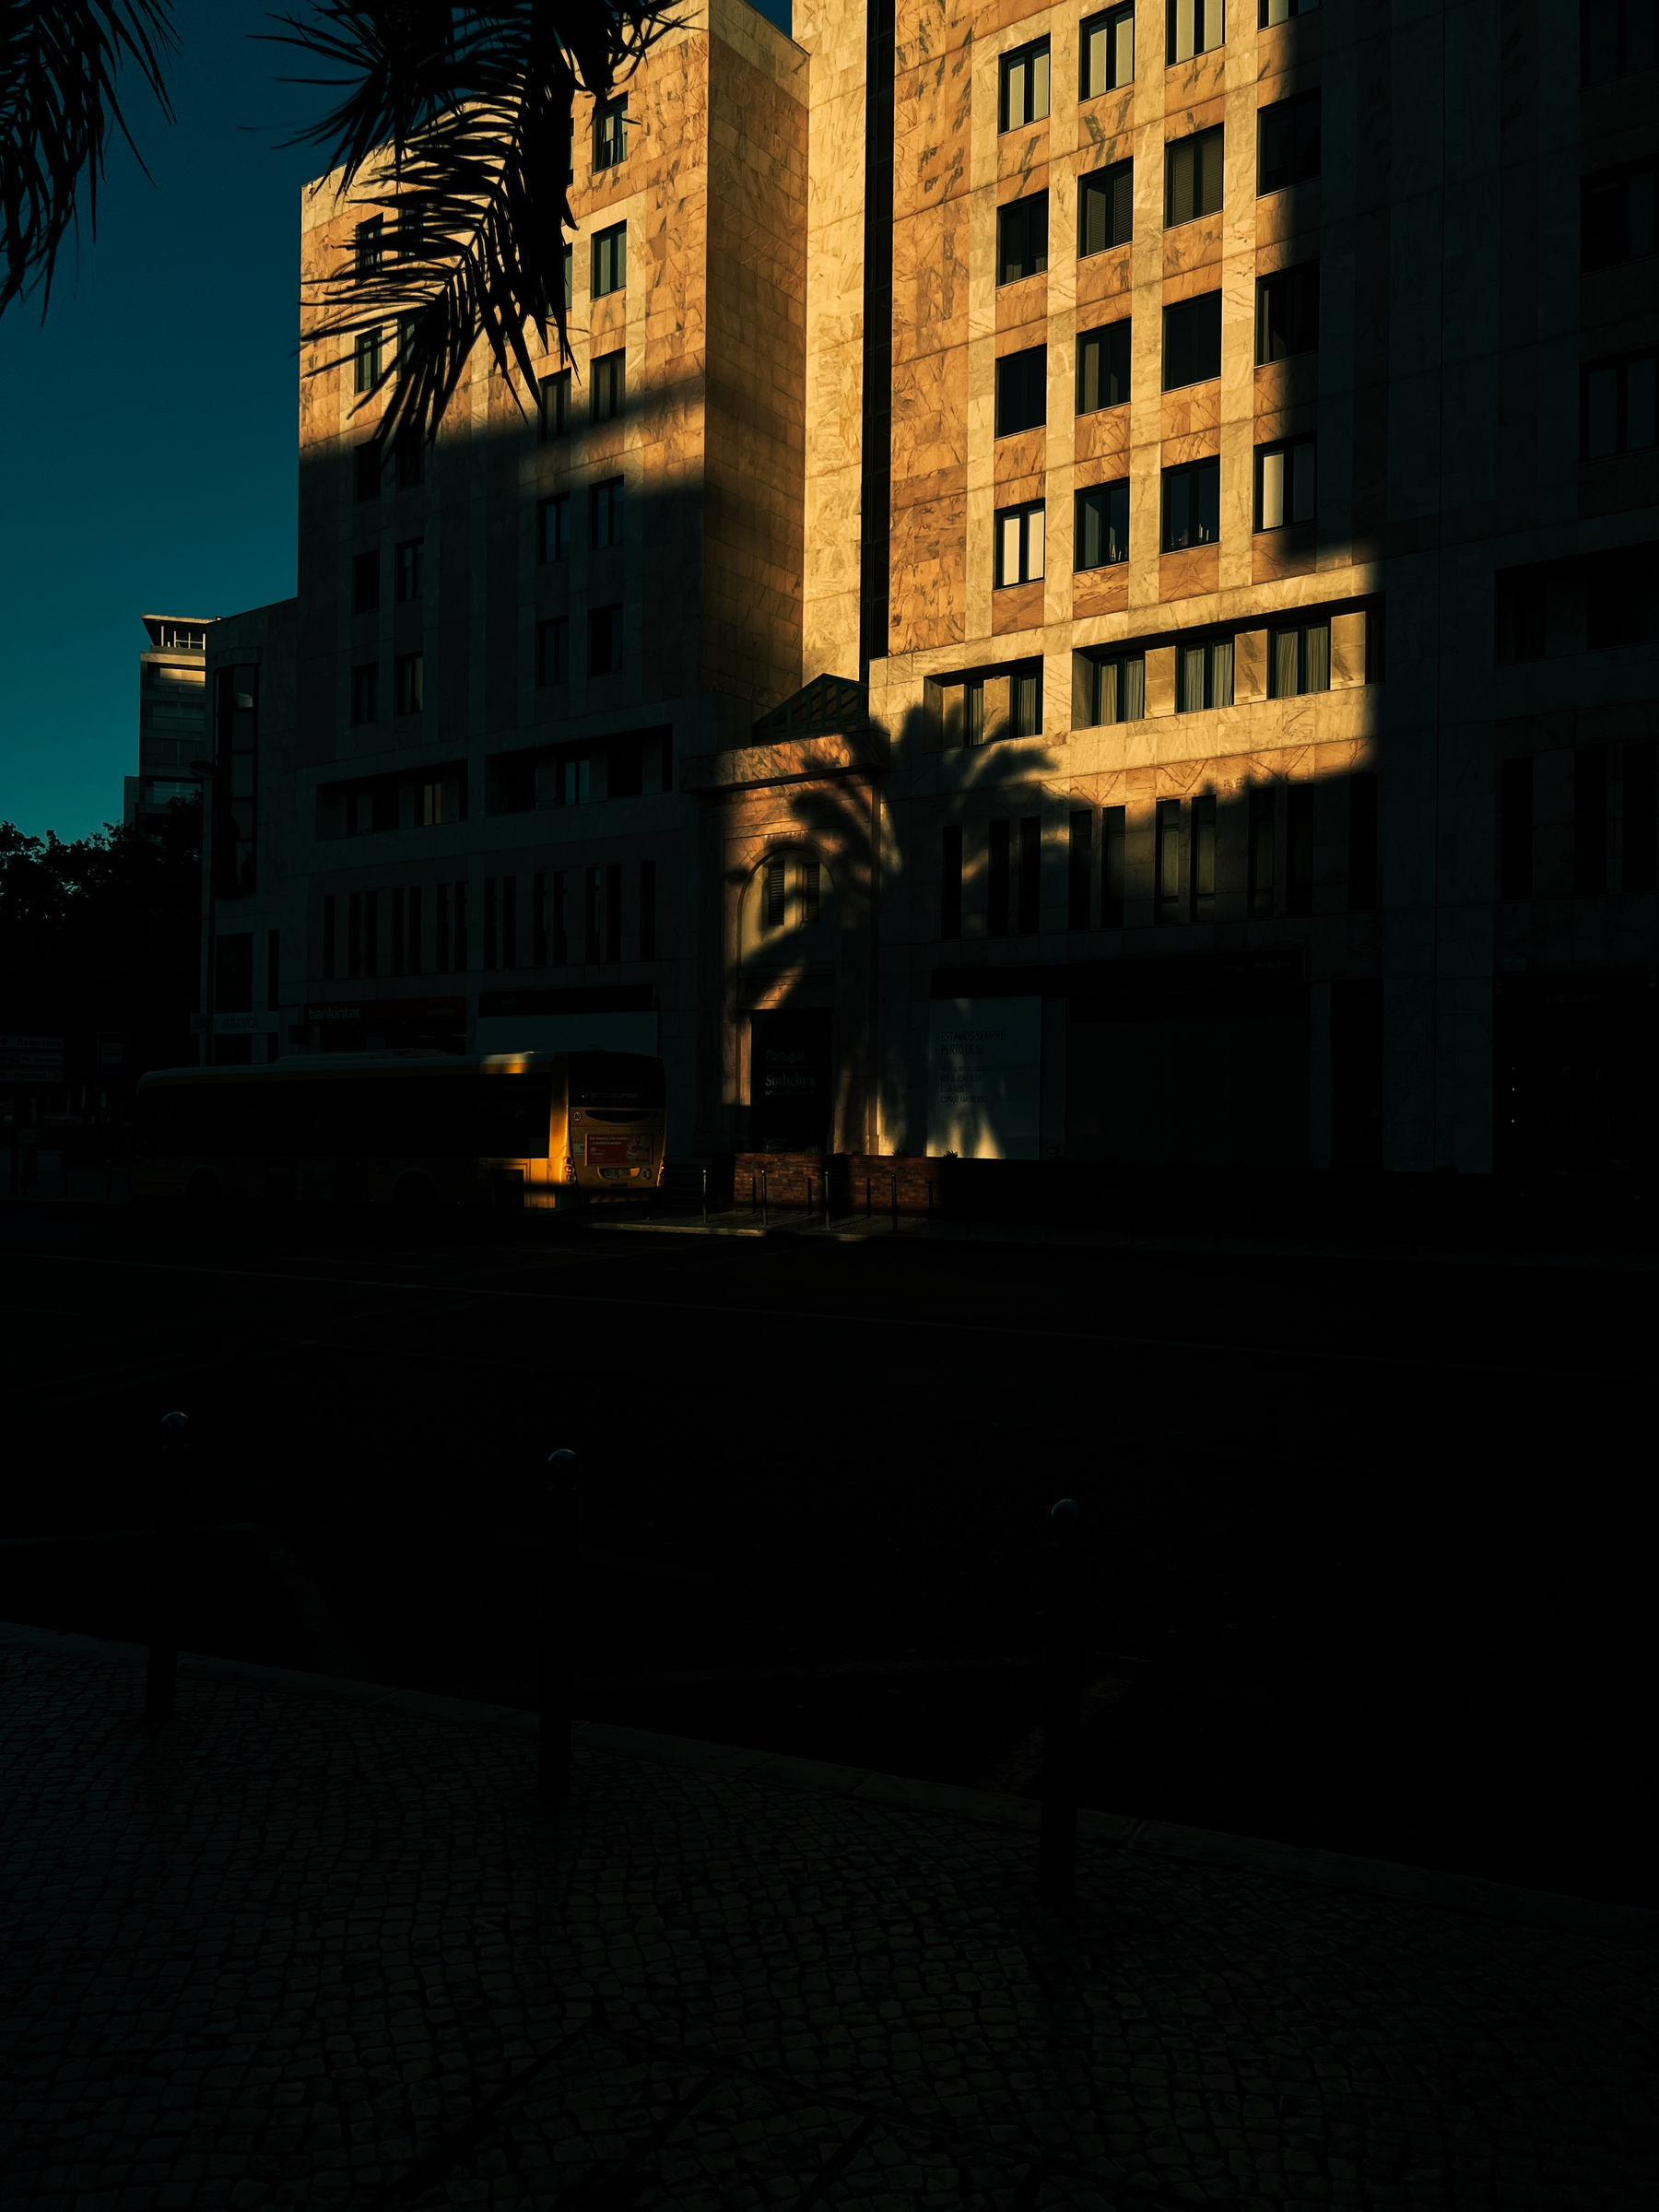 Sunlight and dark shadows in a building. 